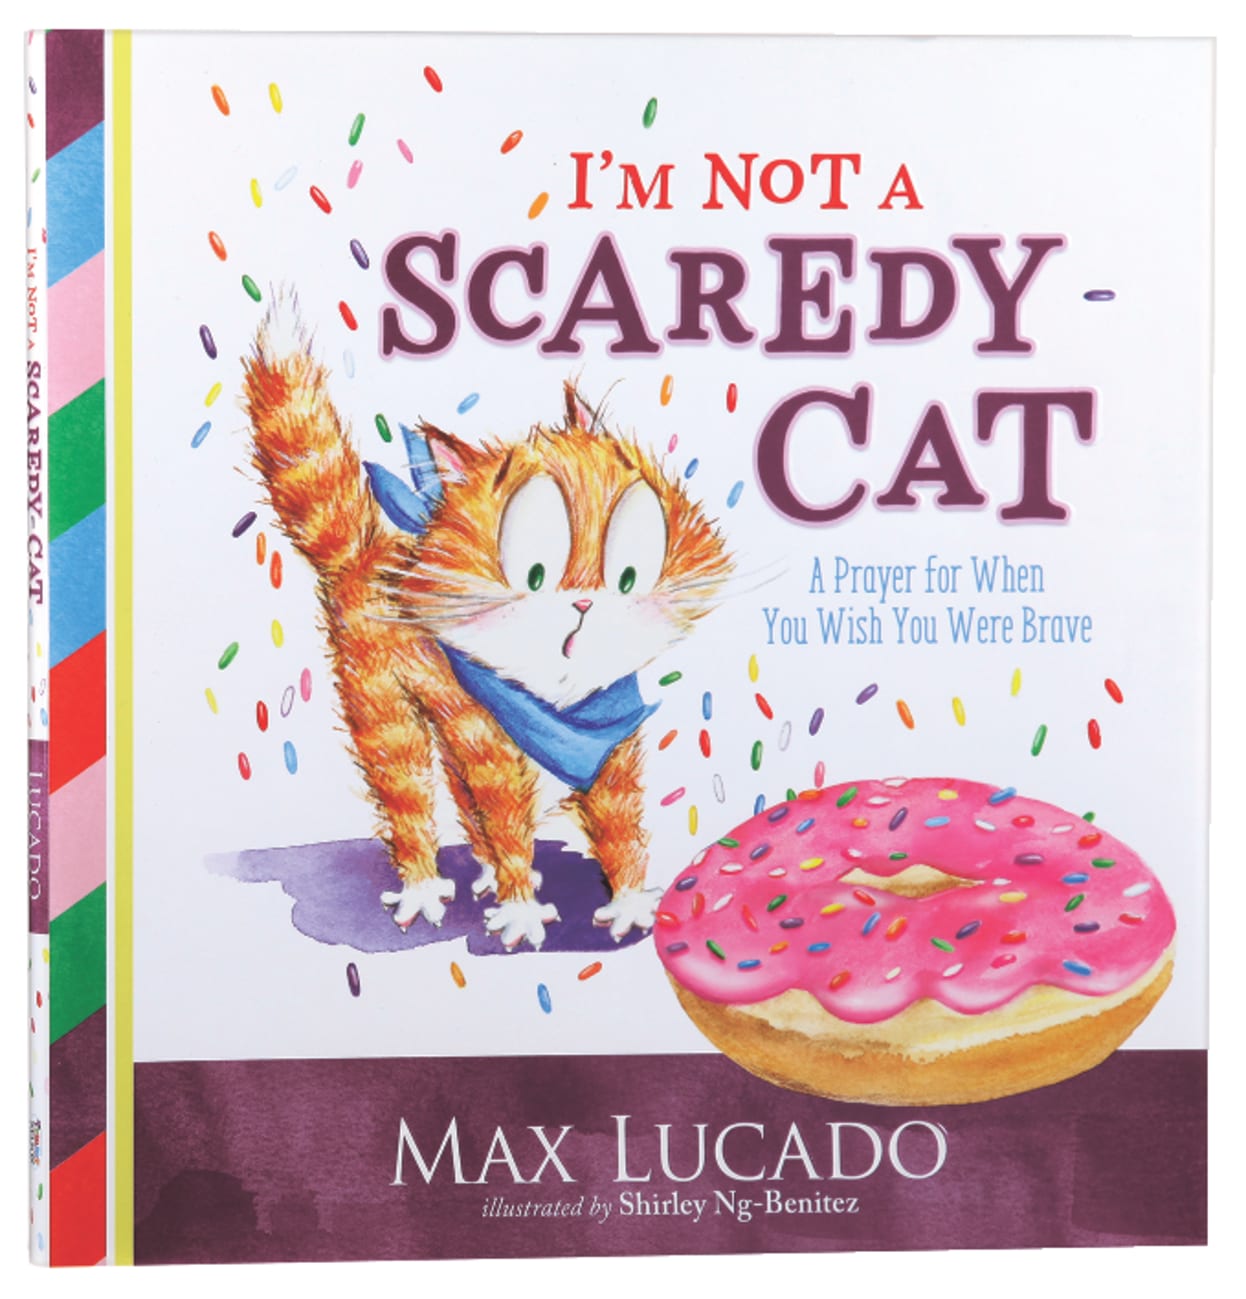 I'm Not a Scaredy-Cat: A Prayer For When You Wish You Were Brave Hardback